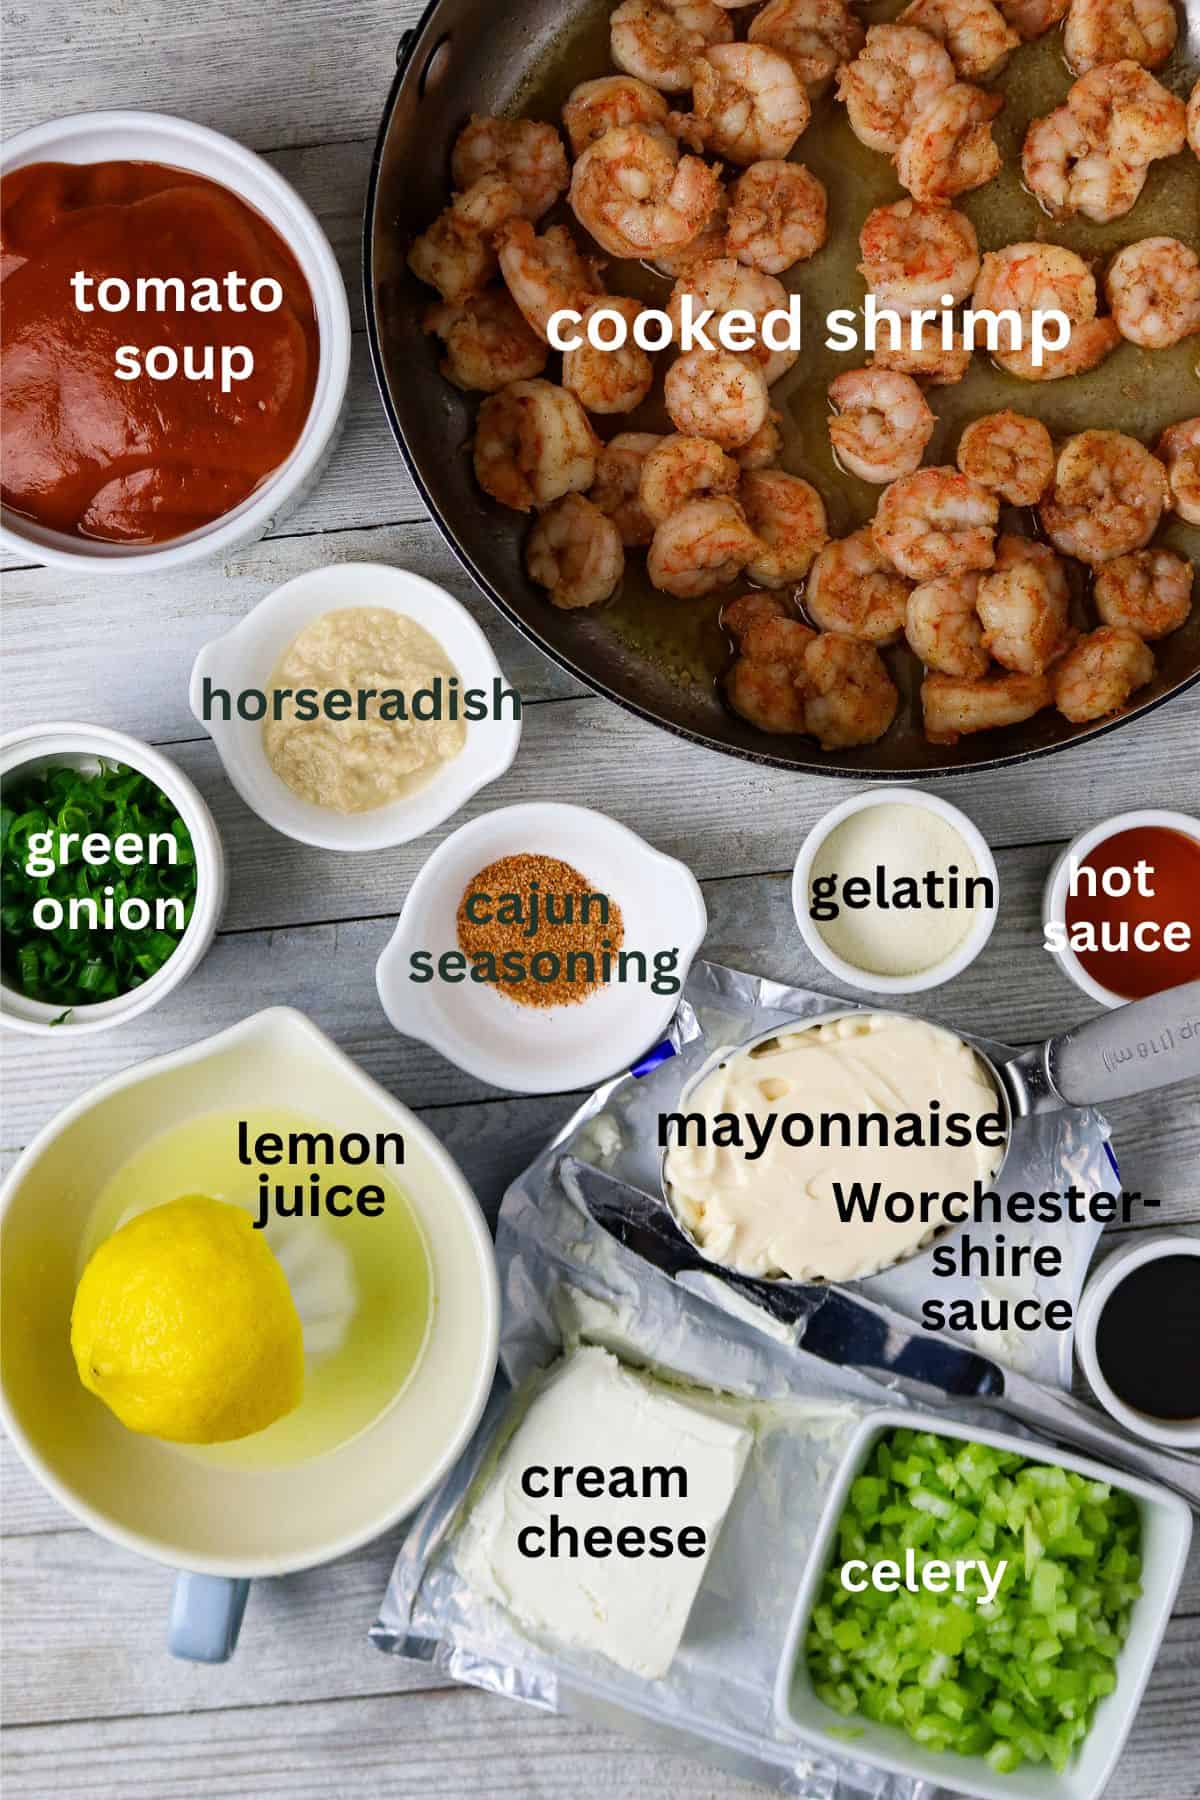 Individual containers or ingredients for a shrimp mold recipe.